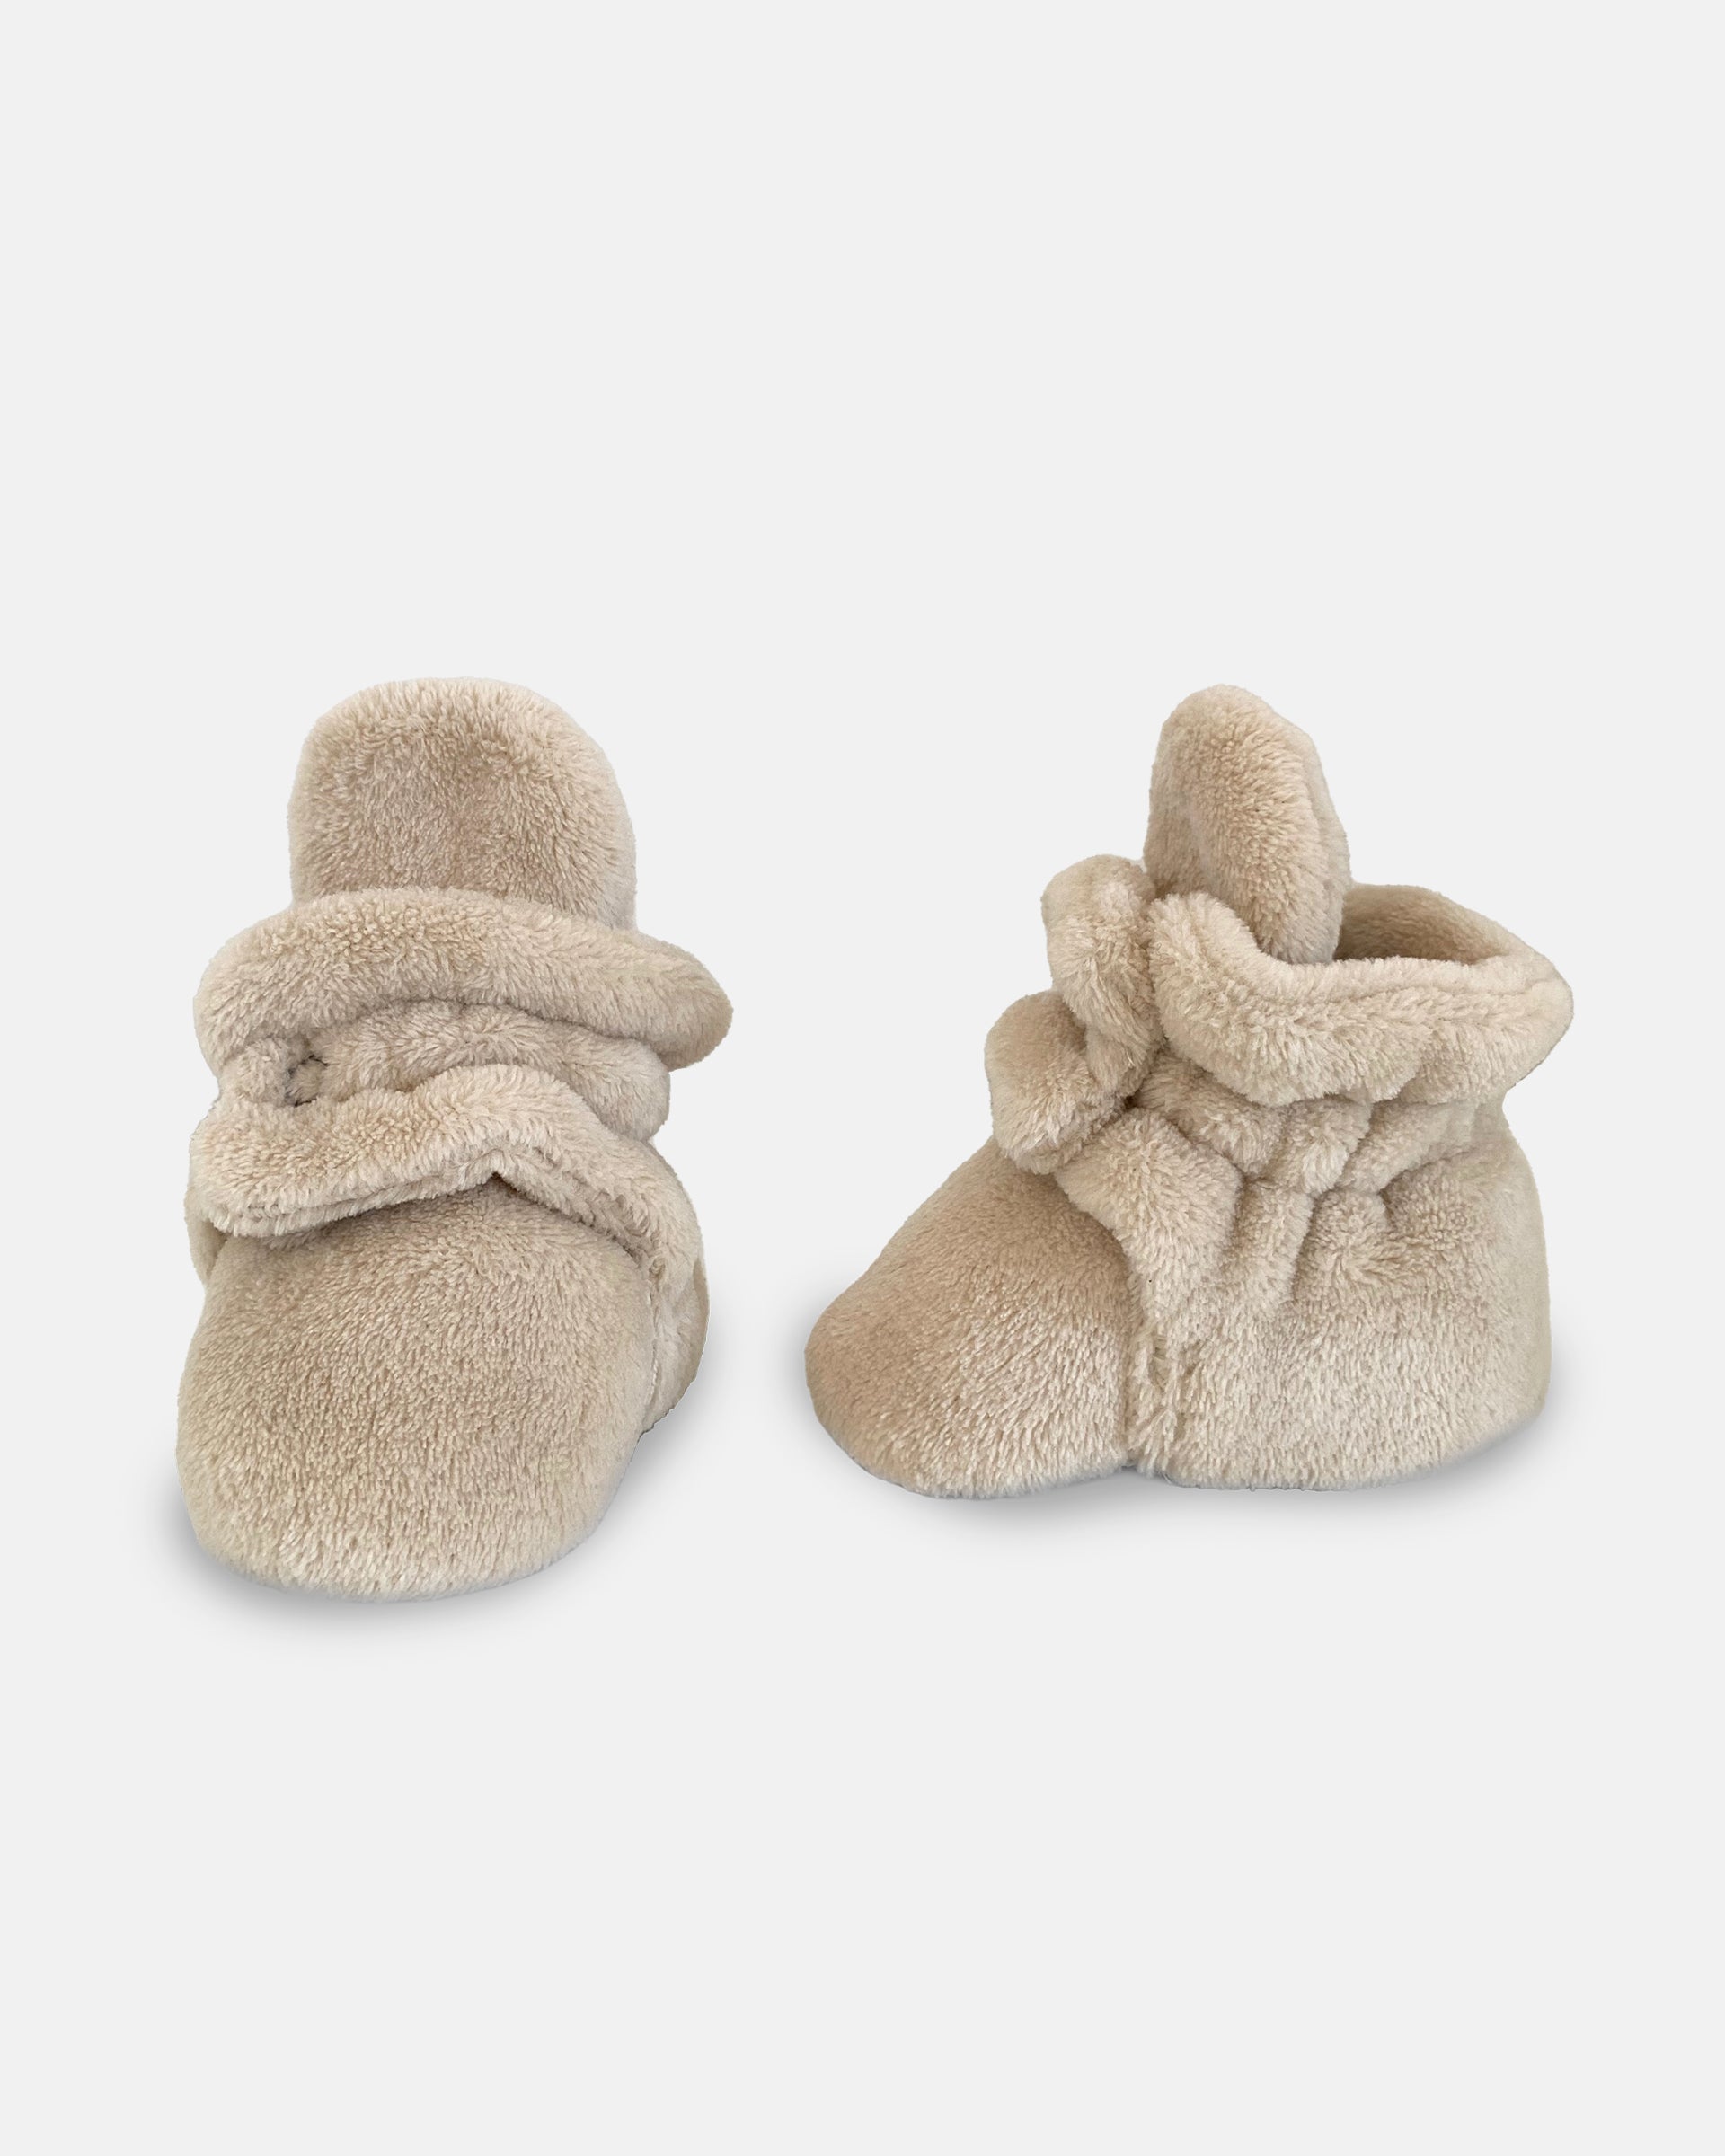 7 A.M. Enfant Baby Booties - Plush Sand - Twinkle Twinkle Little One